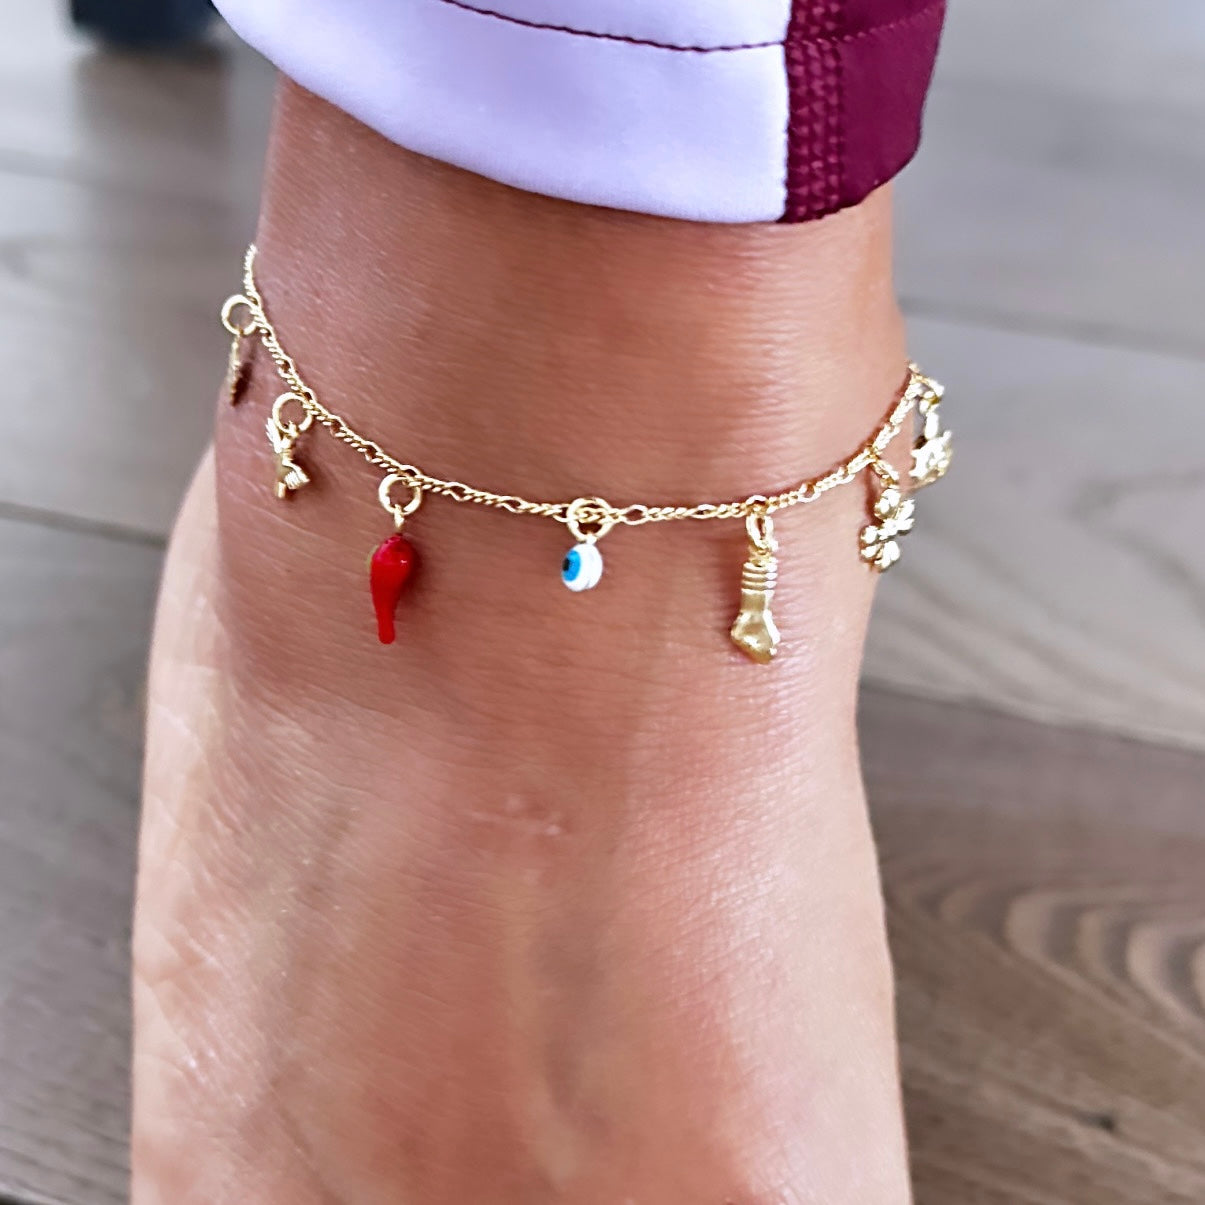 Micro Good Fortune Charm Anklet